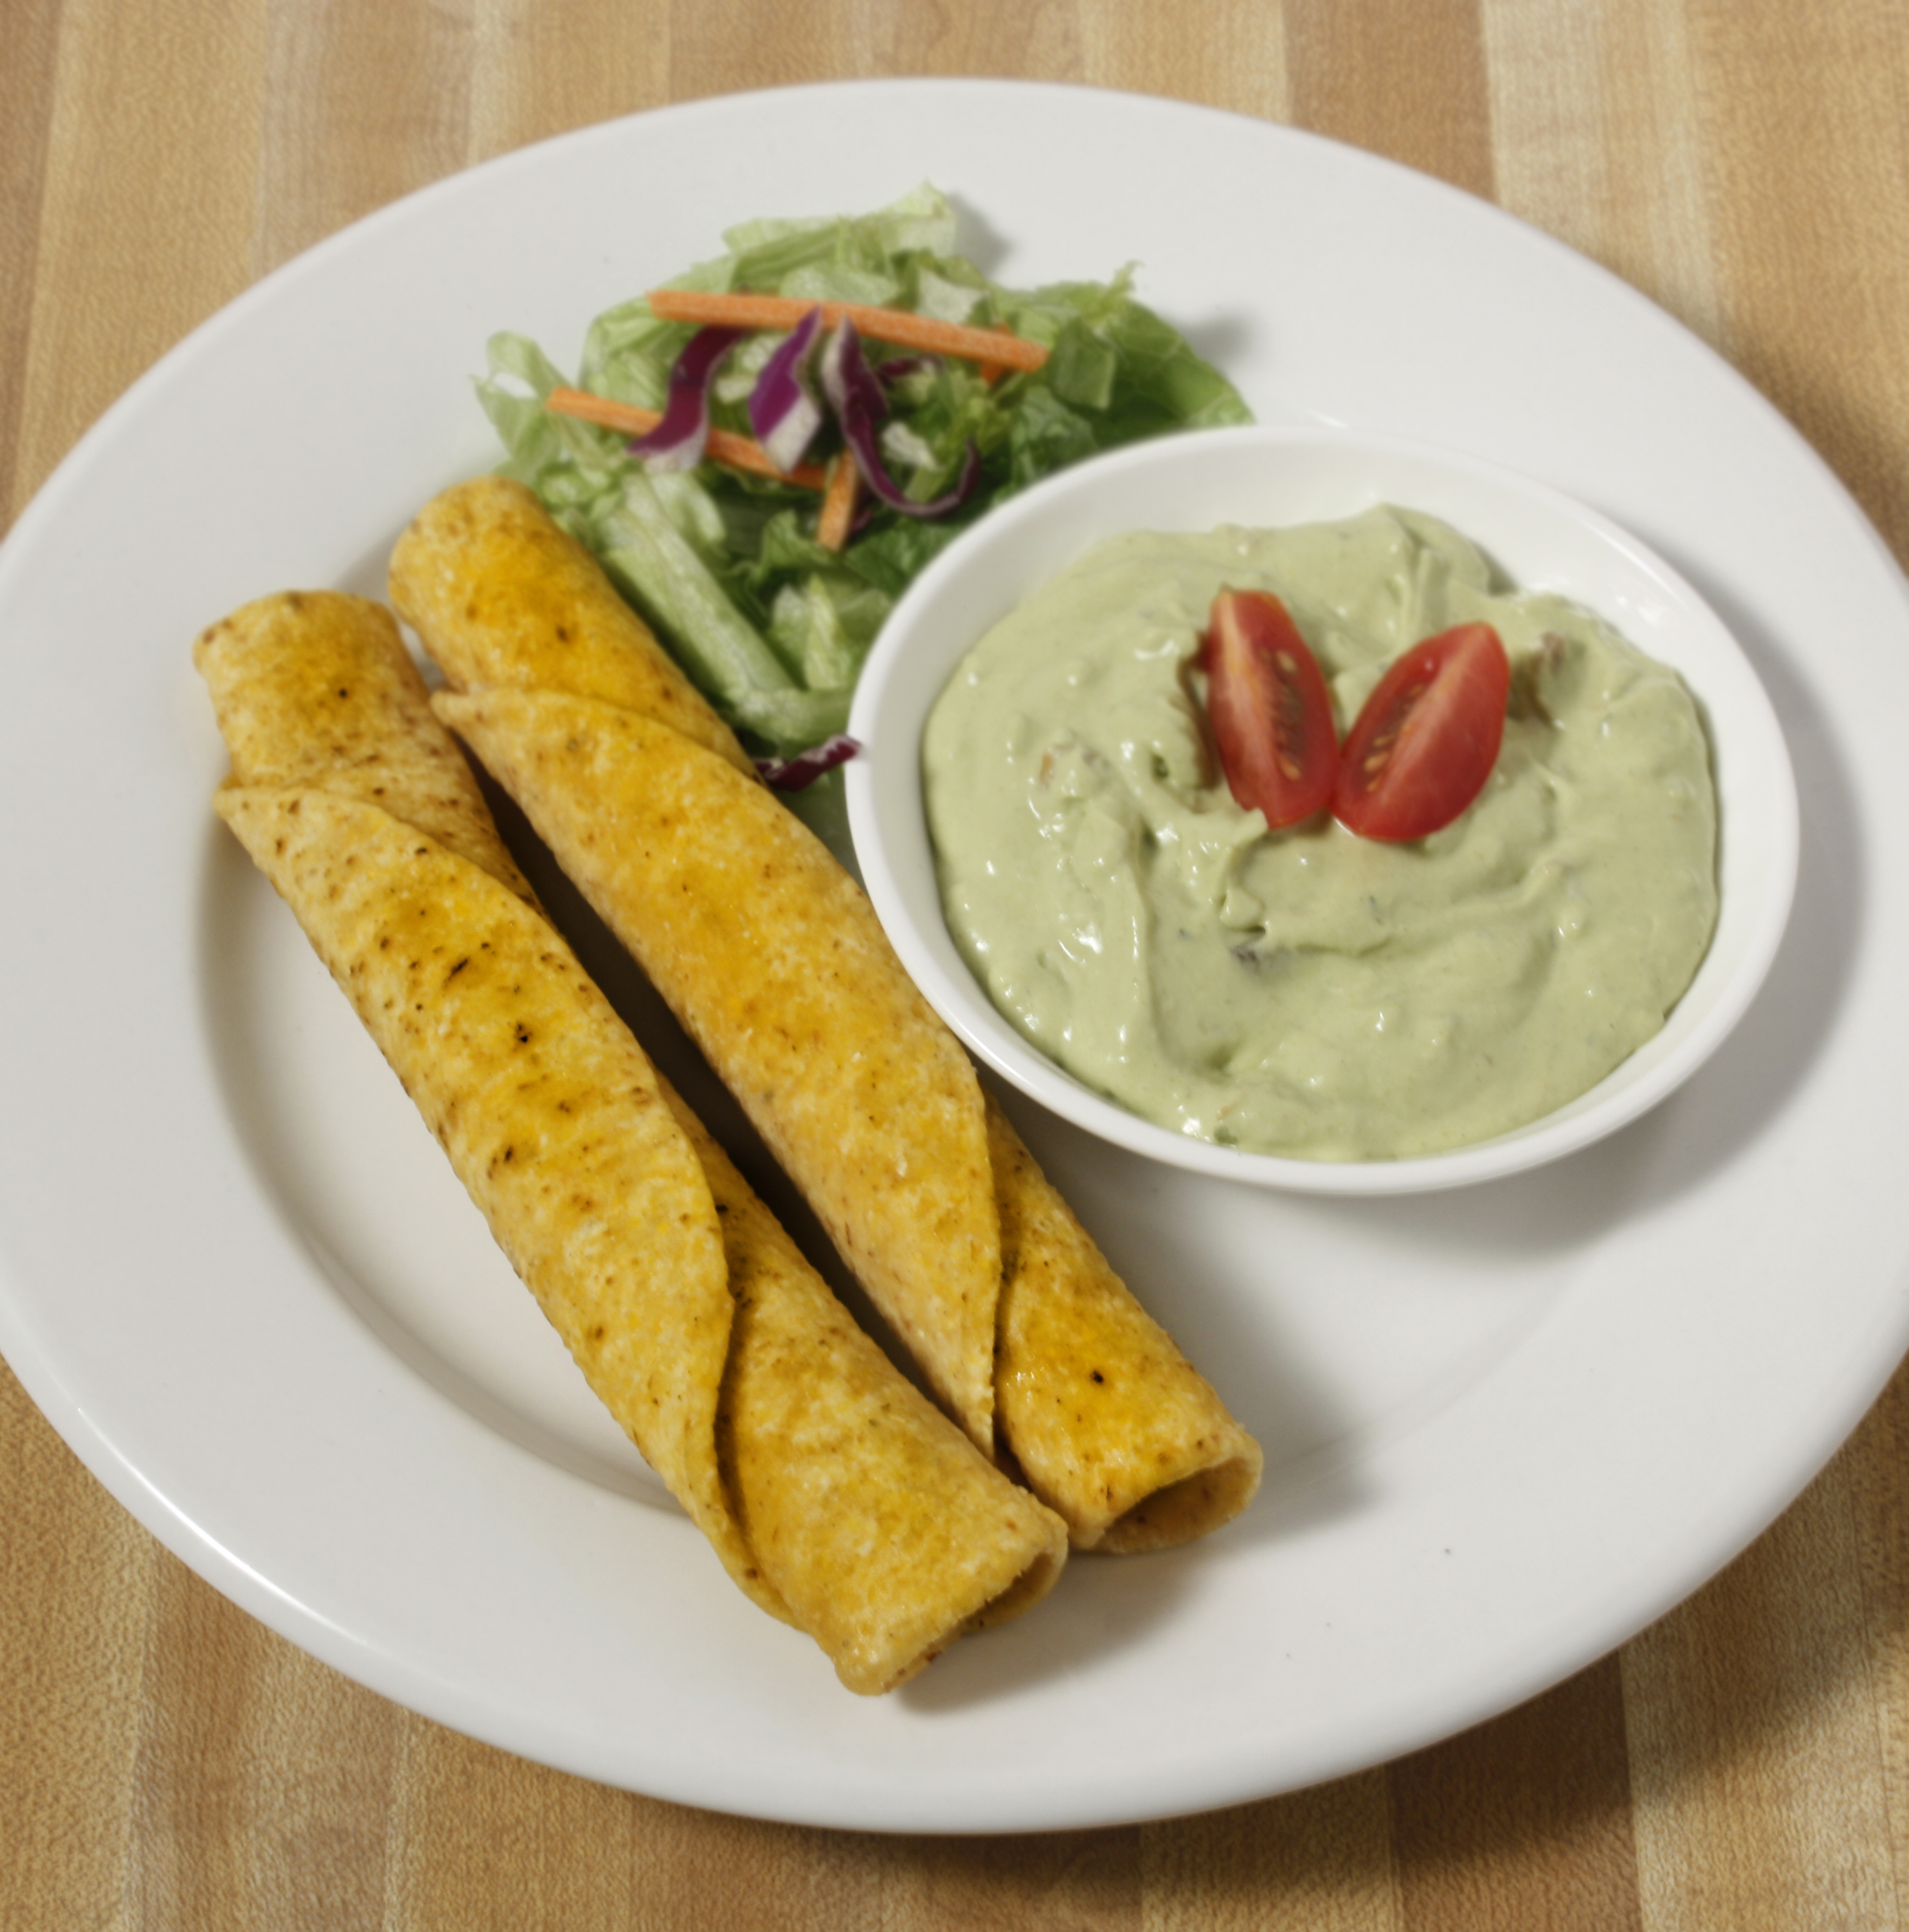 Plate of foodservice Posada Mexican Taquitos with Salad and Dipping Sauce in a school setting